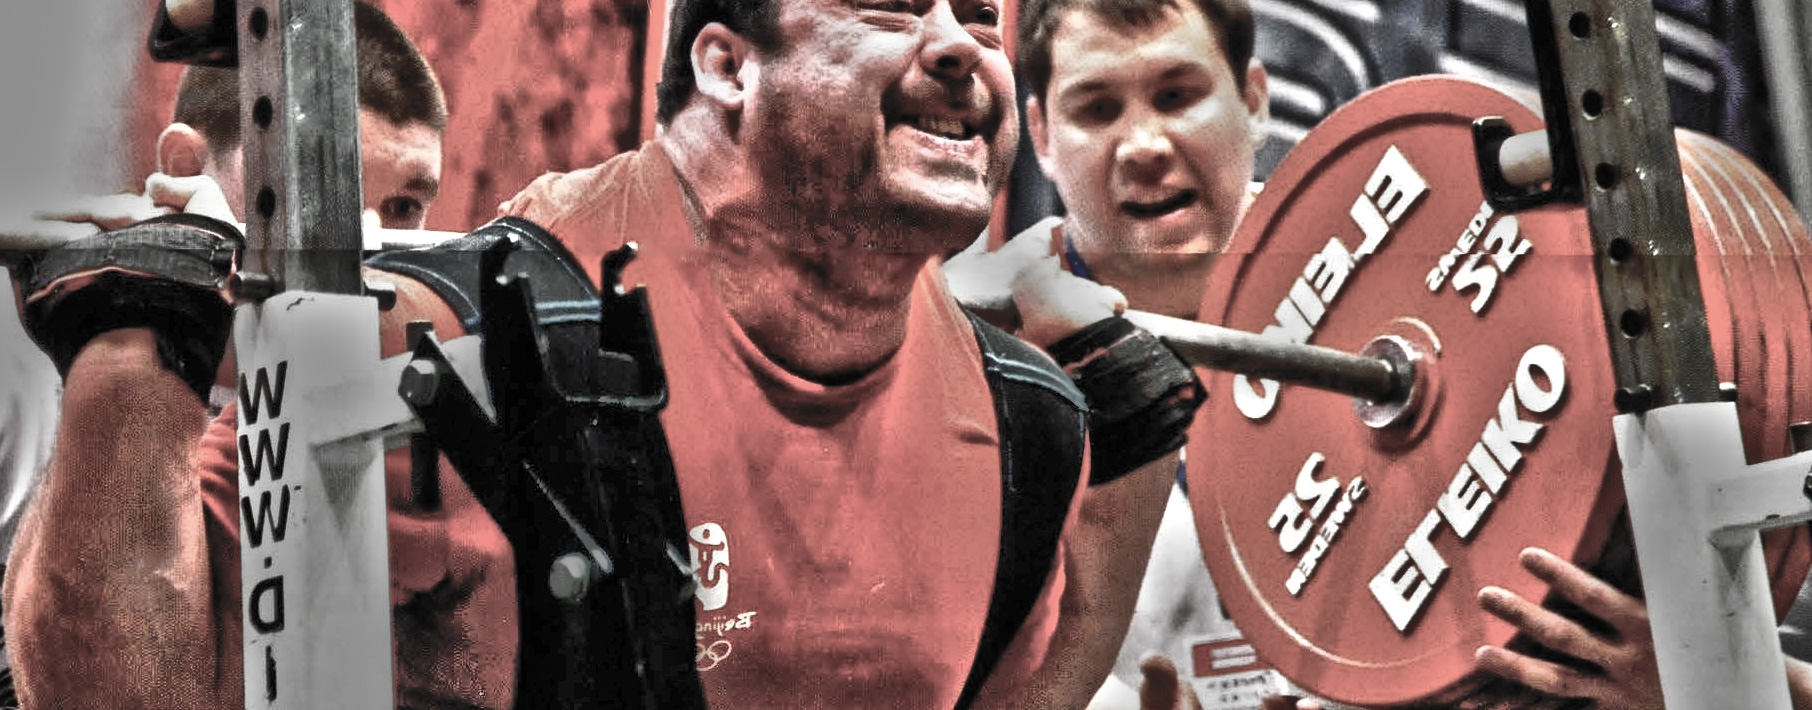 snow White talent Hinge All-Time Records - All About powerlifting